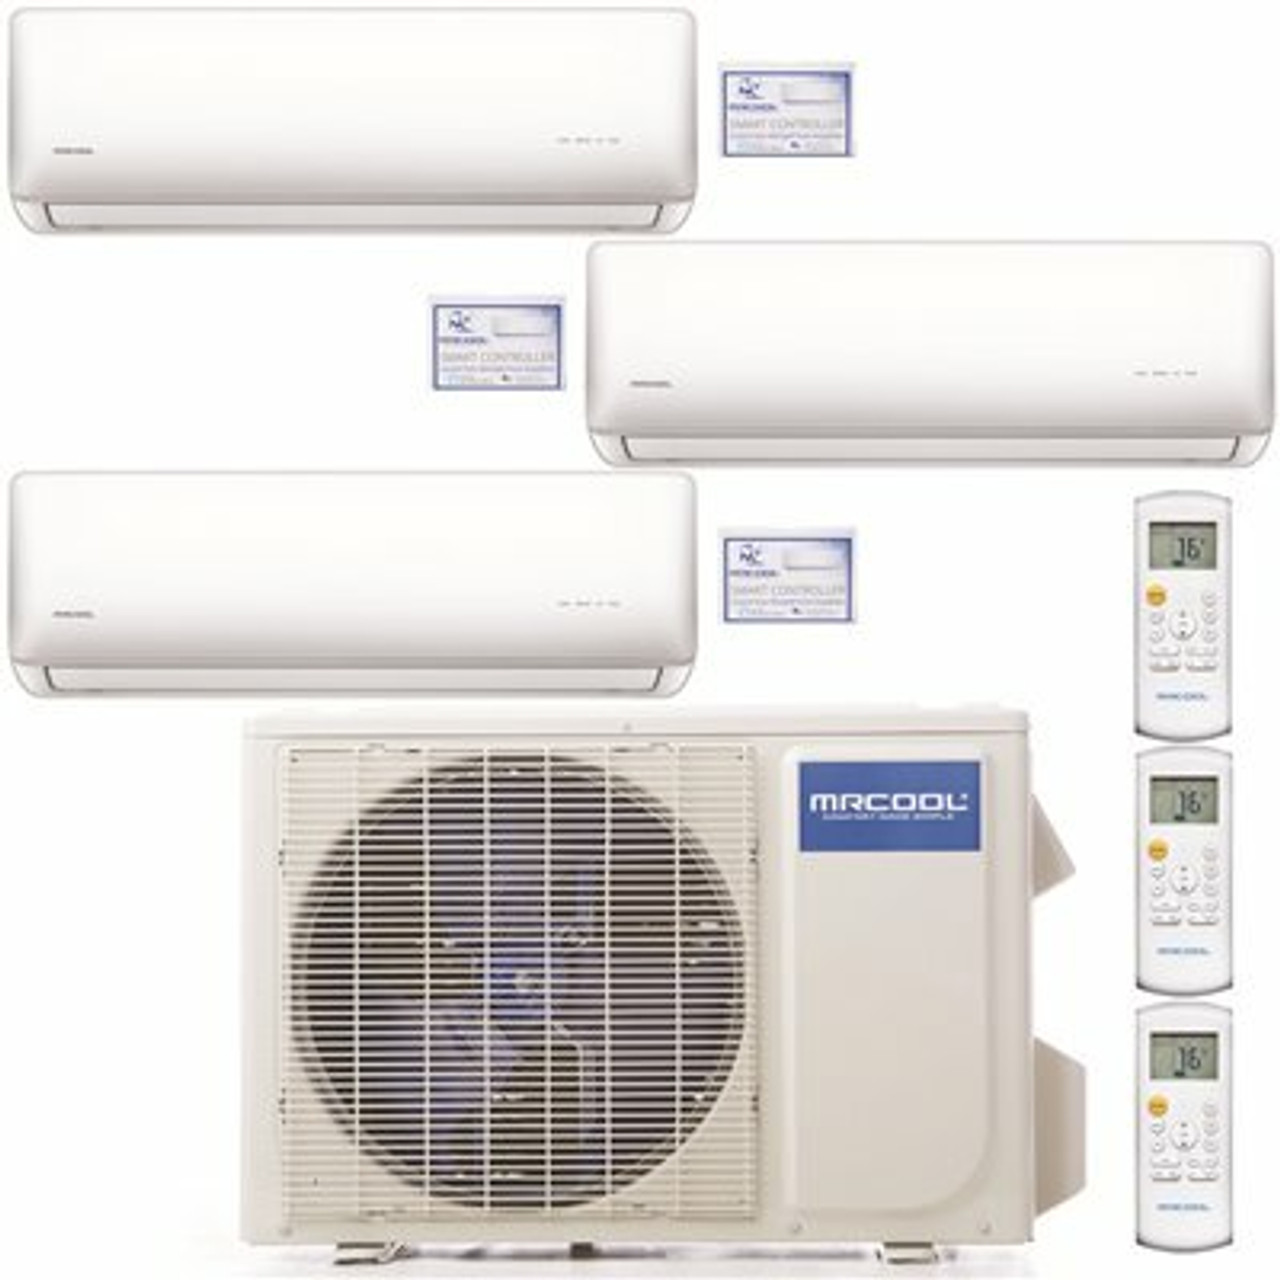 Mrcool Olympus 36,000 Btu 3 Ton 3-Zone Ductless Mini Split Air Conditioner And Heat Pump, 16 Ft. Install Kit - 230V/60Hz - 308810696